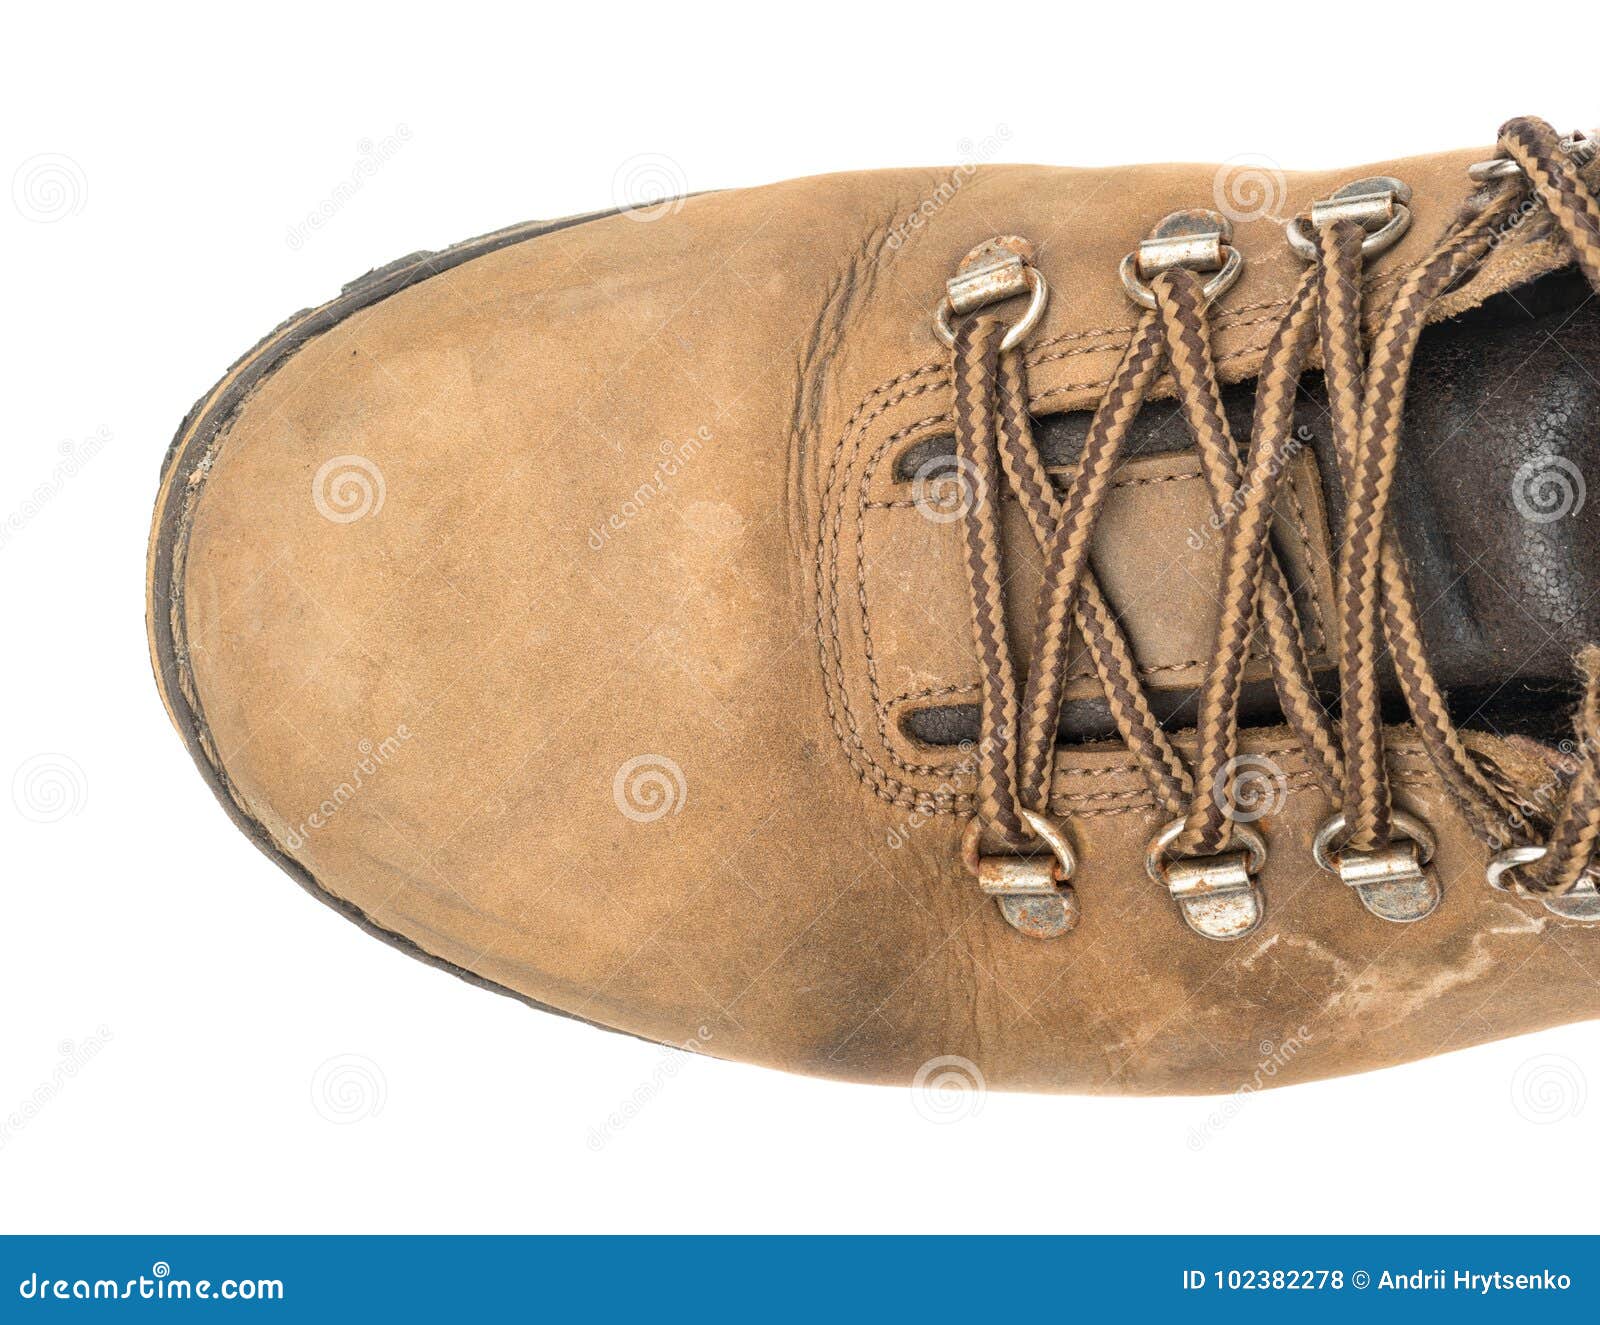 Old winter boots stock photo. Image of journey, laces - 102382278